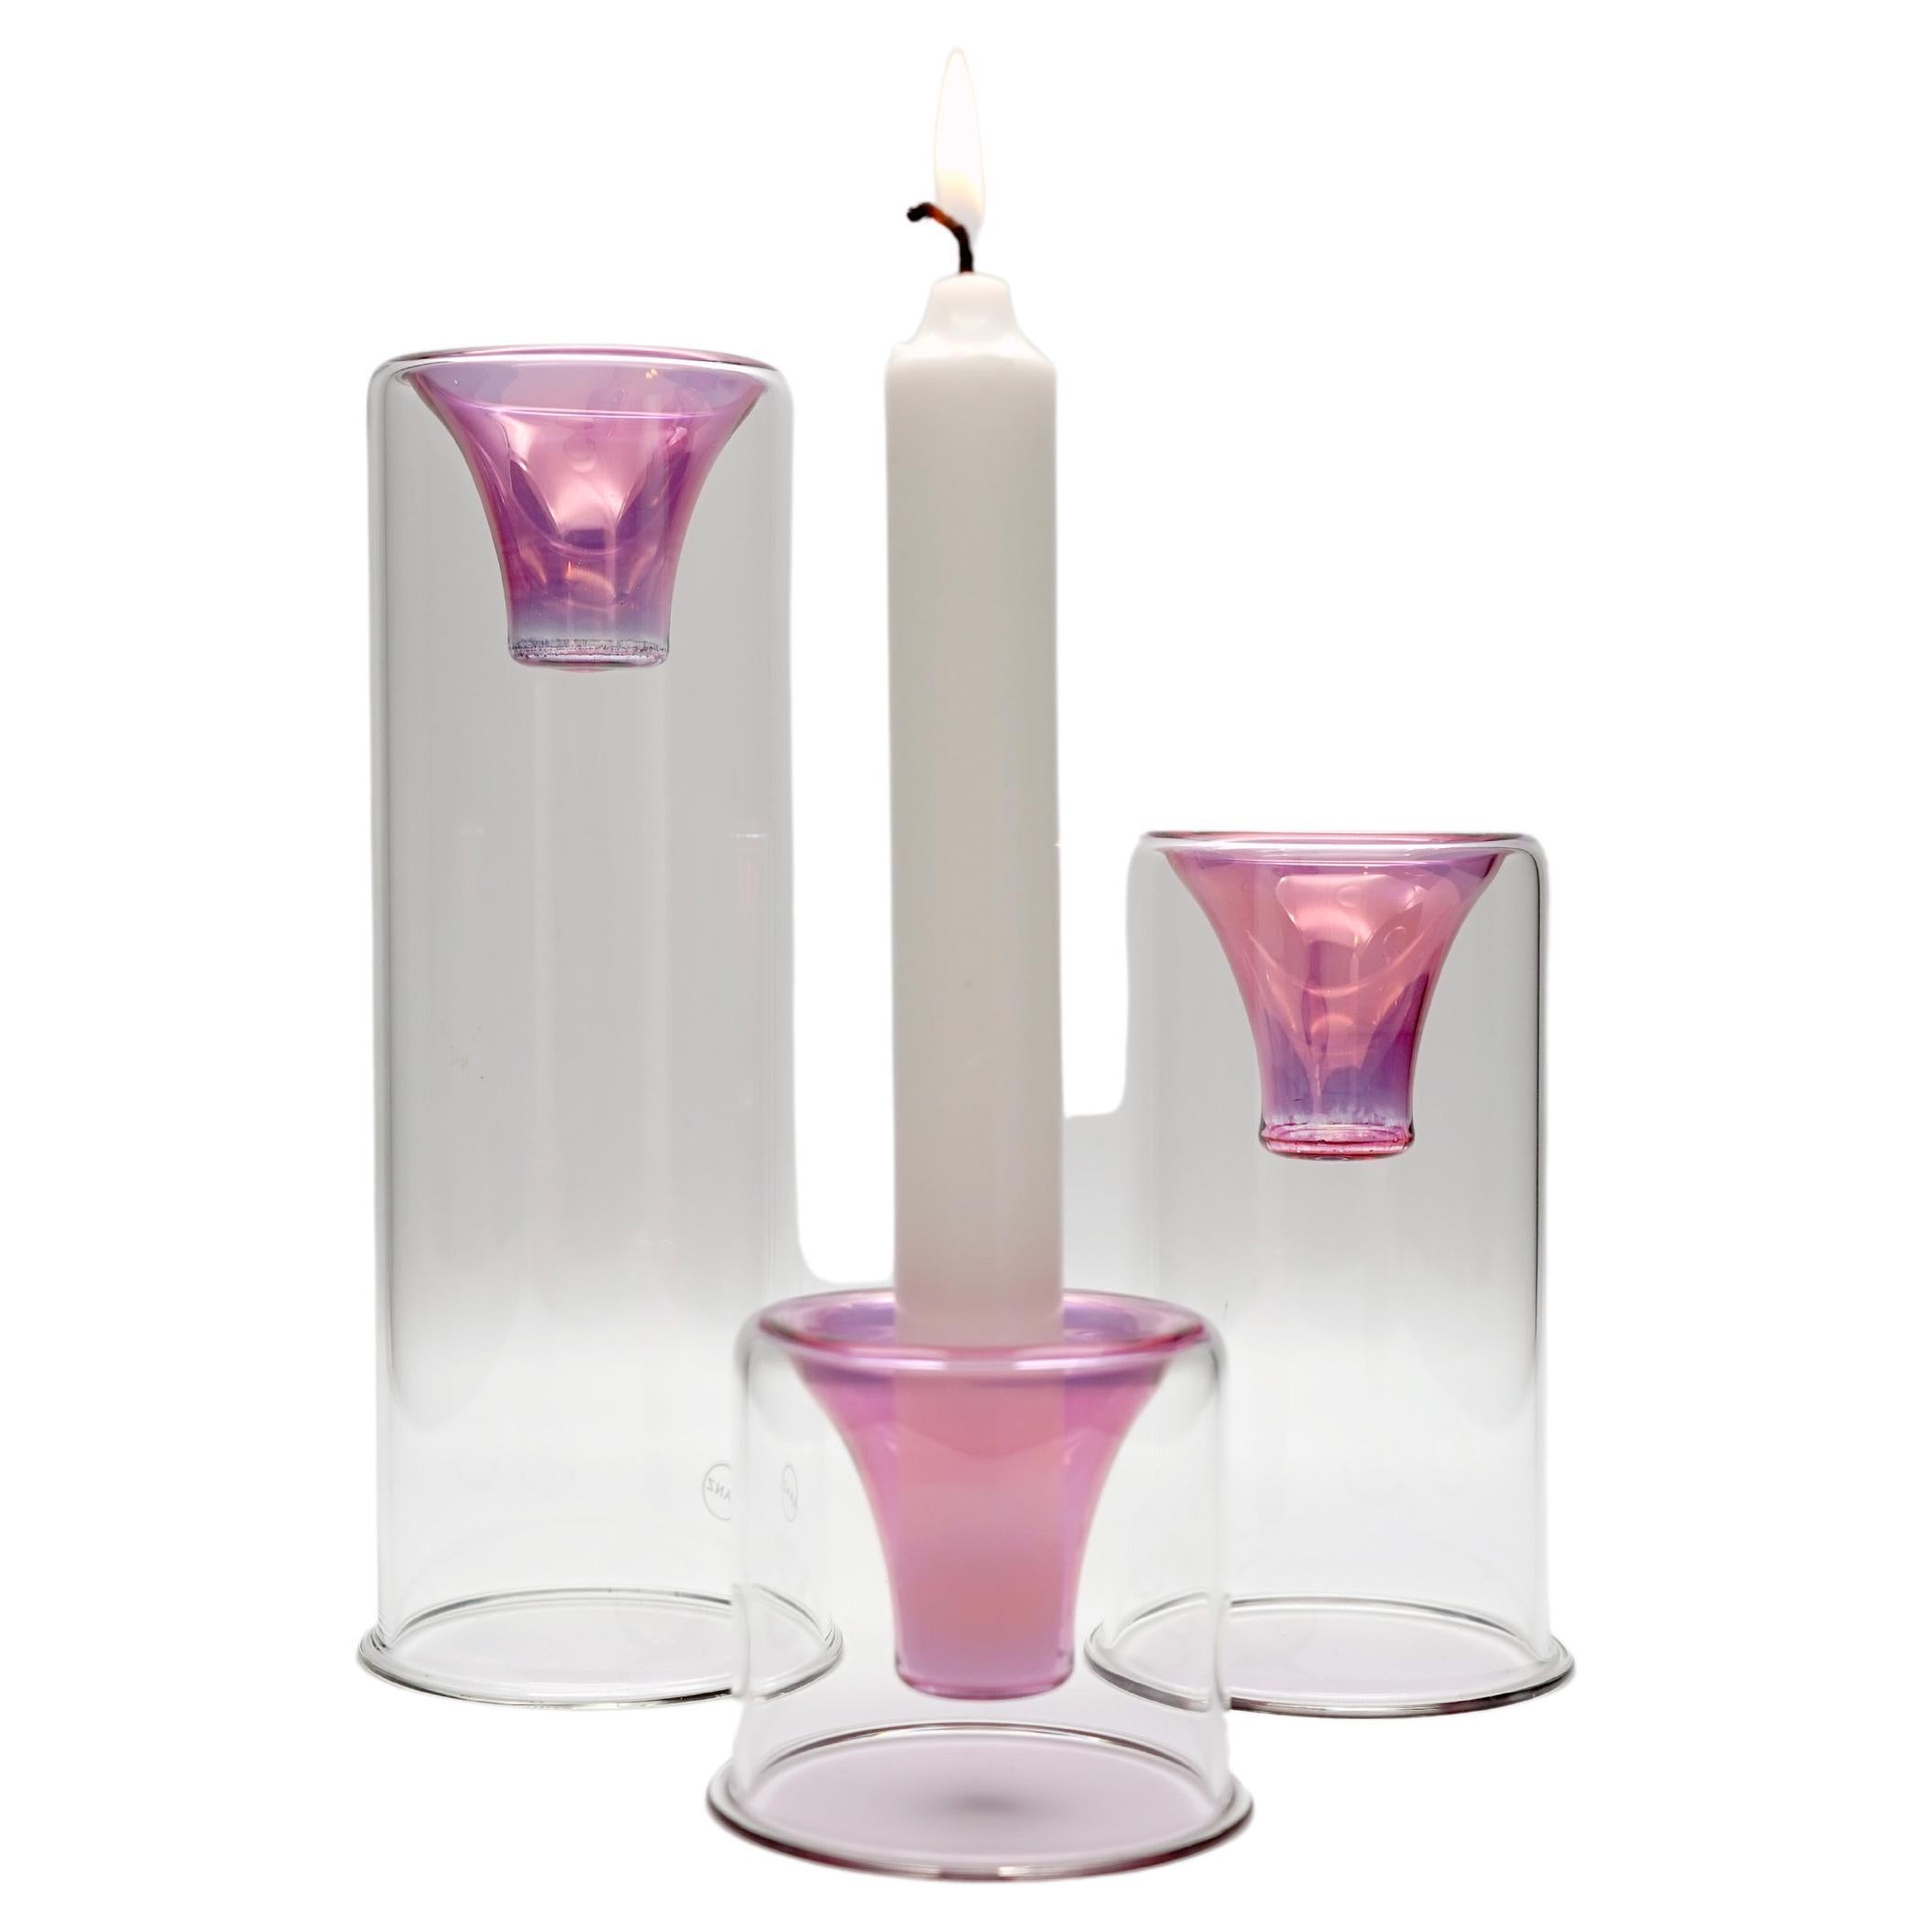 21st Century Hand-Crafted Glass Candlesticks, Pink Color, Kanz Architetti